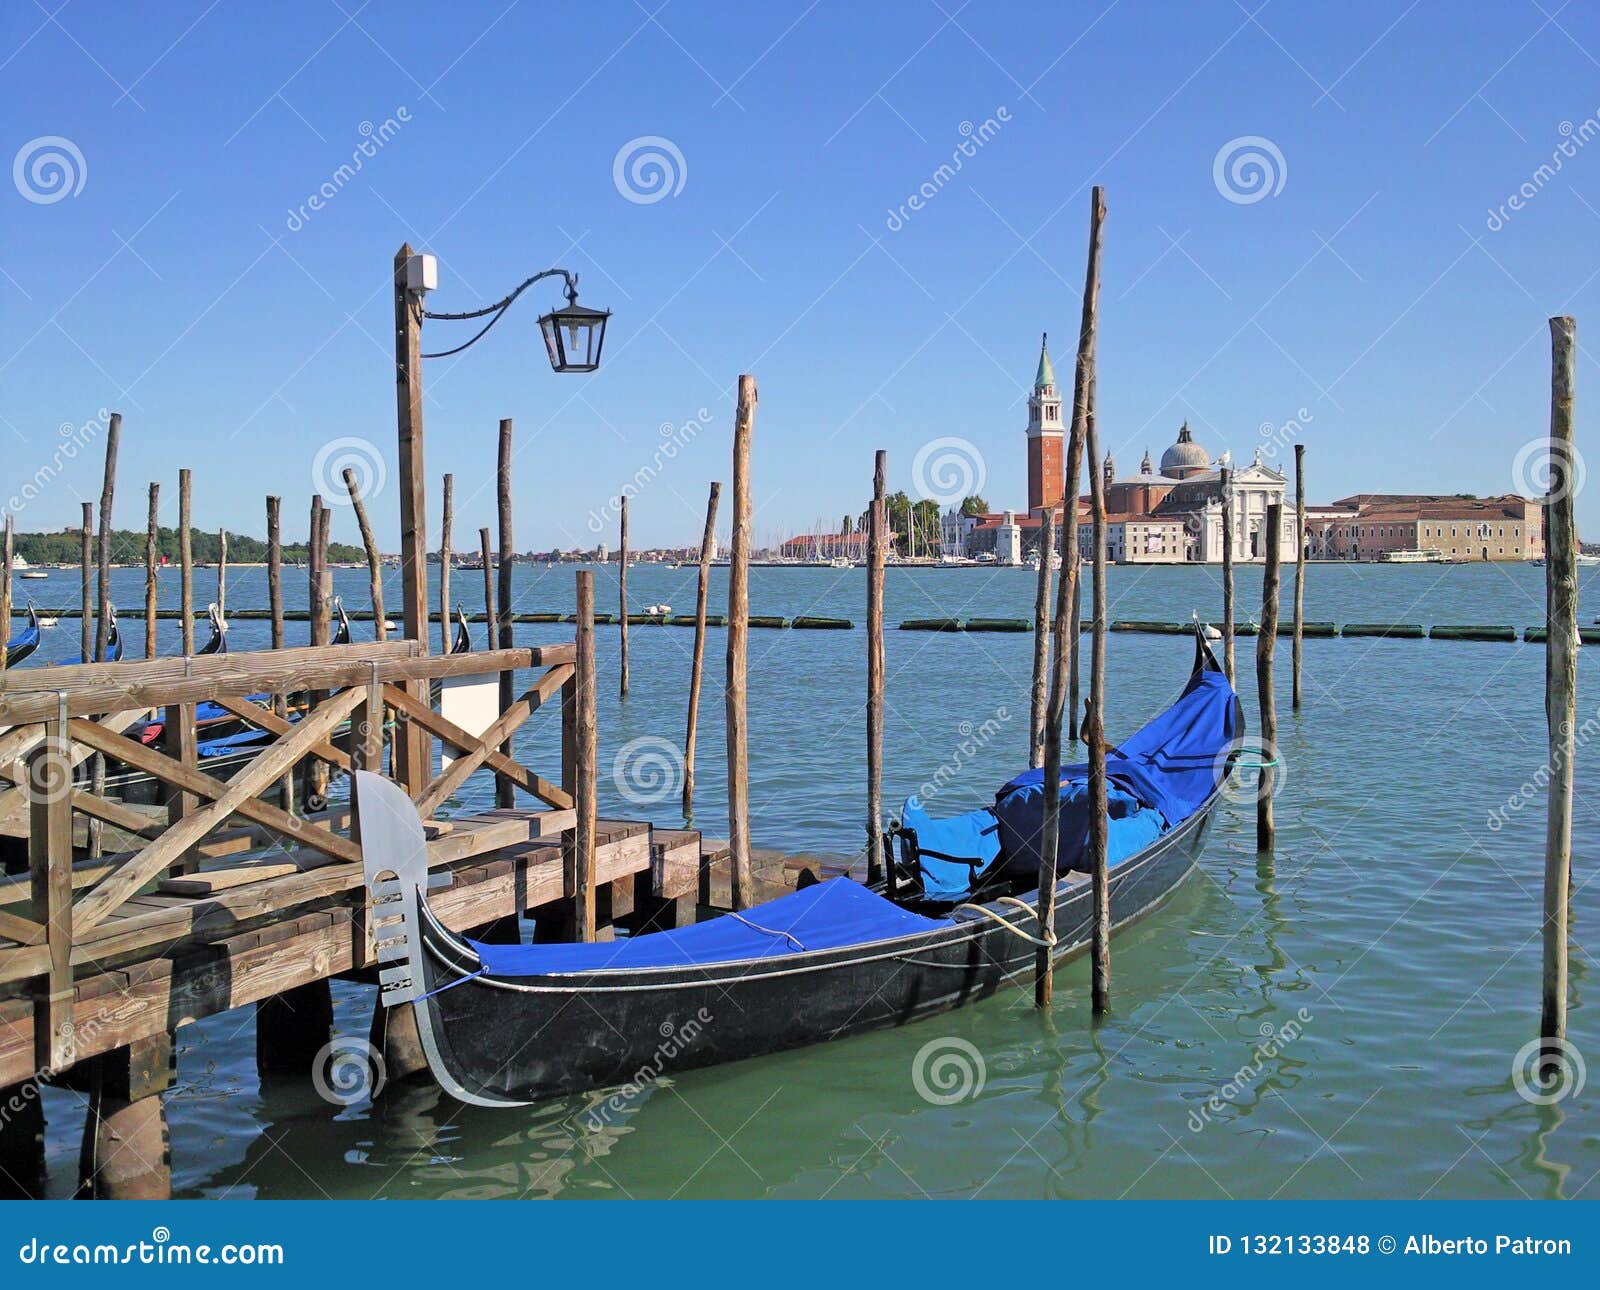 Venice With Gondola And Main Canal With San Marco Square